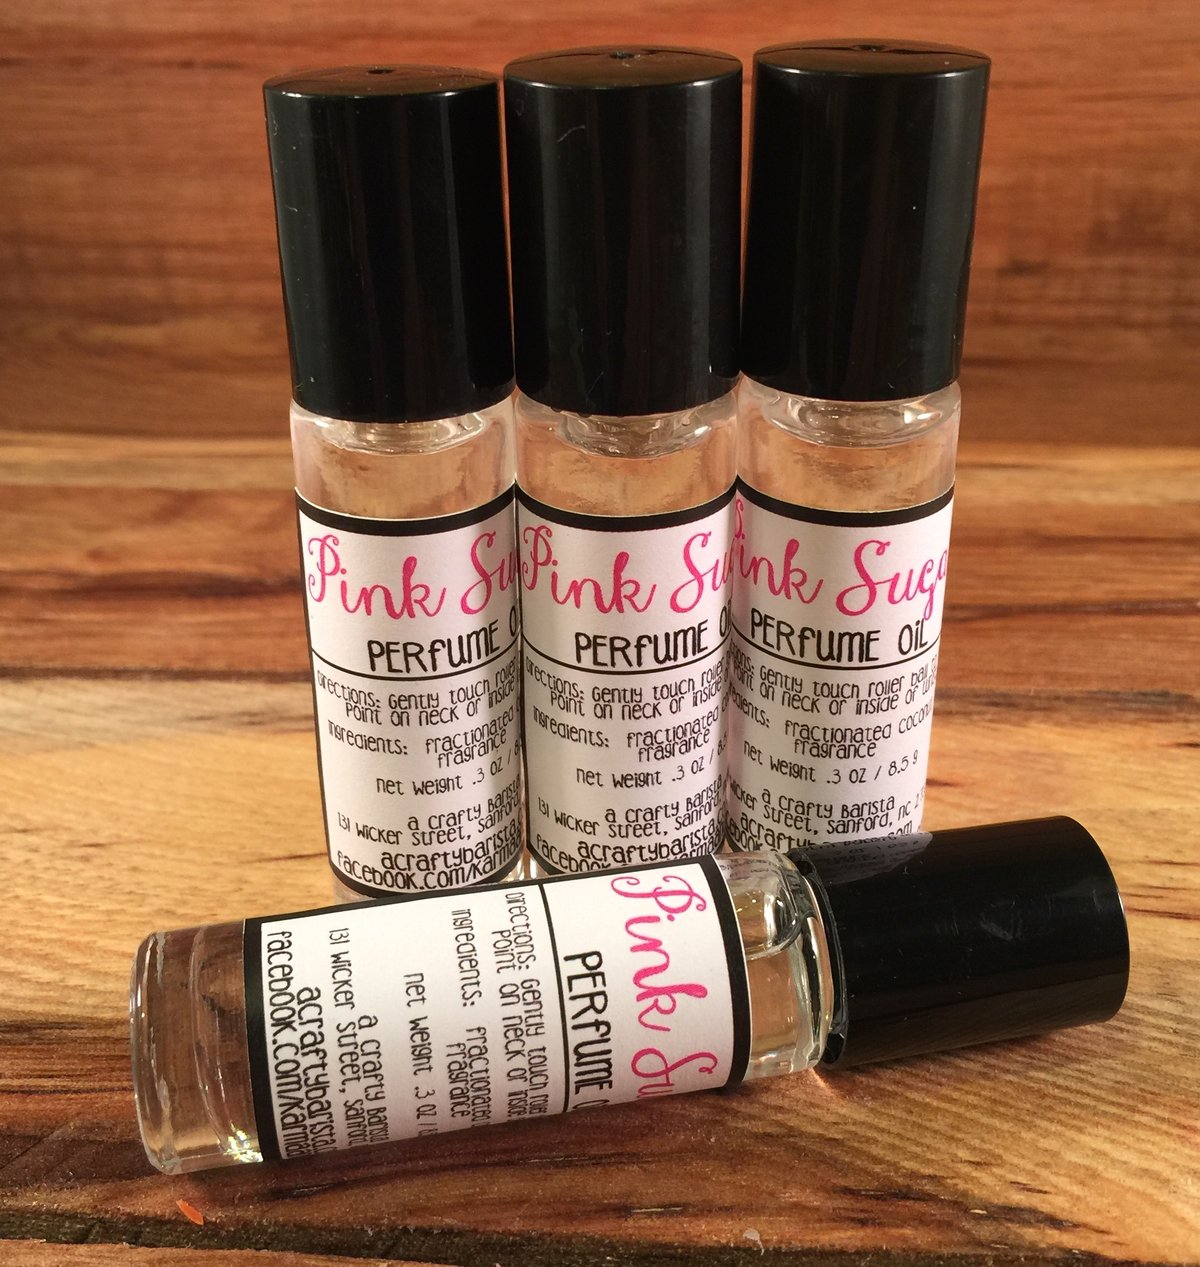 Image of Roll On Perfume Oil